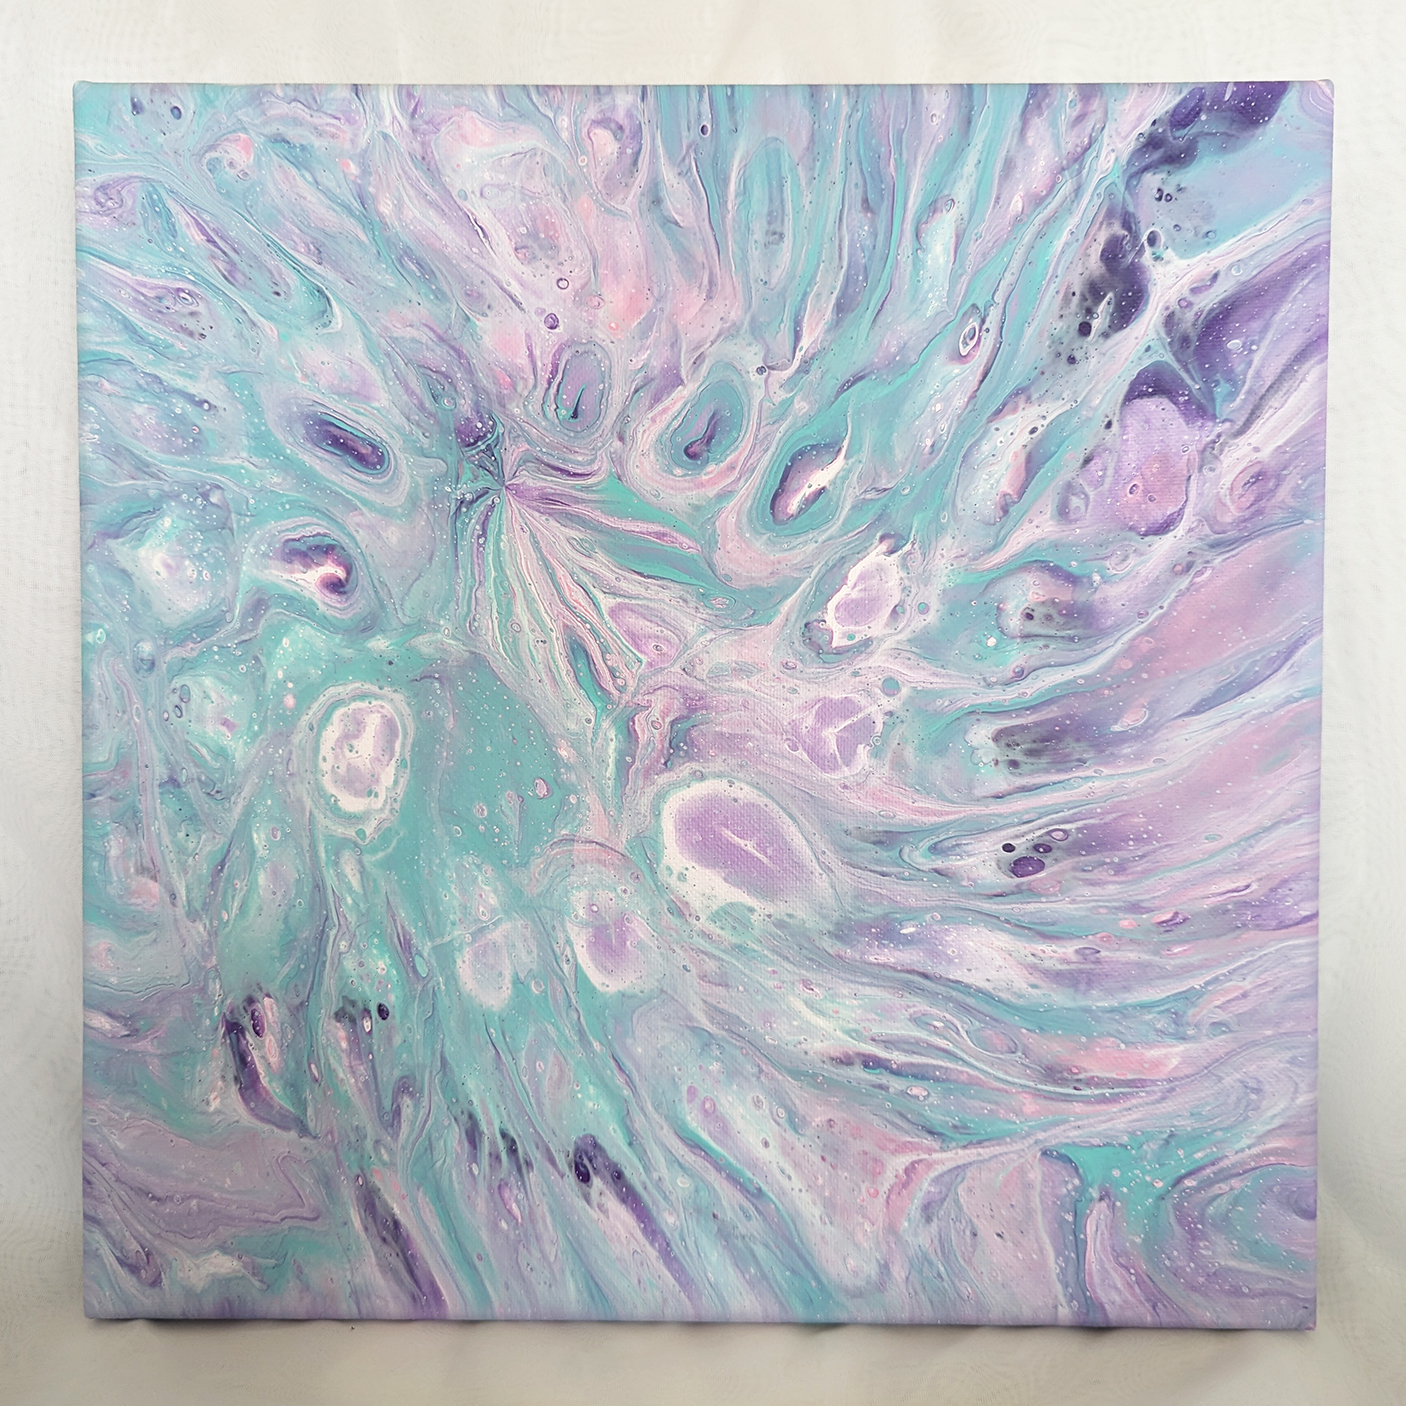 Abstract painting in pastel colors of green, purple, white, and pink.